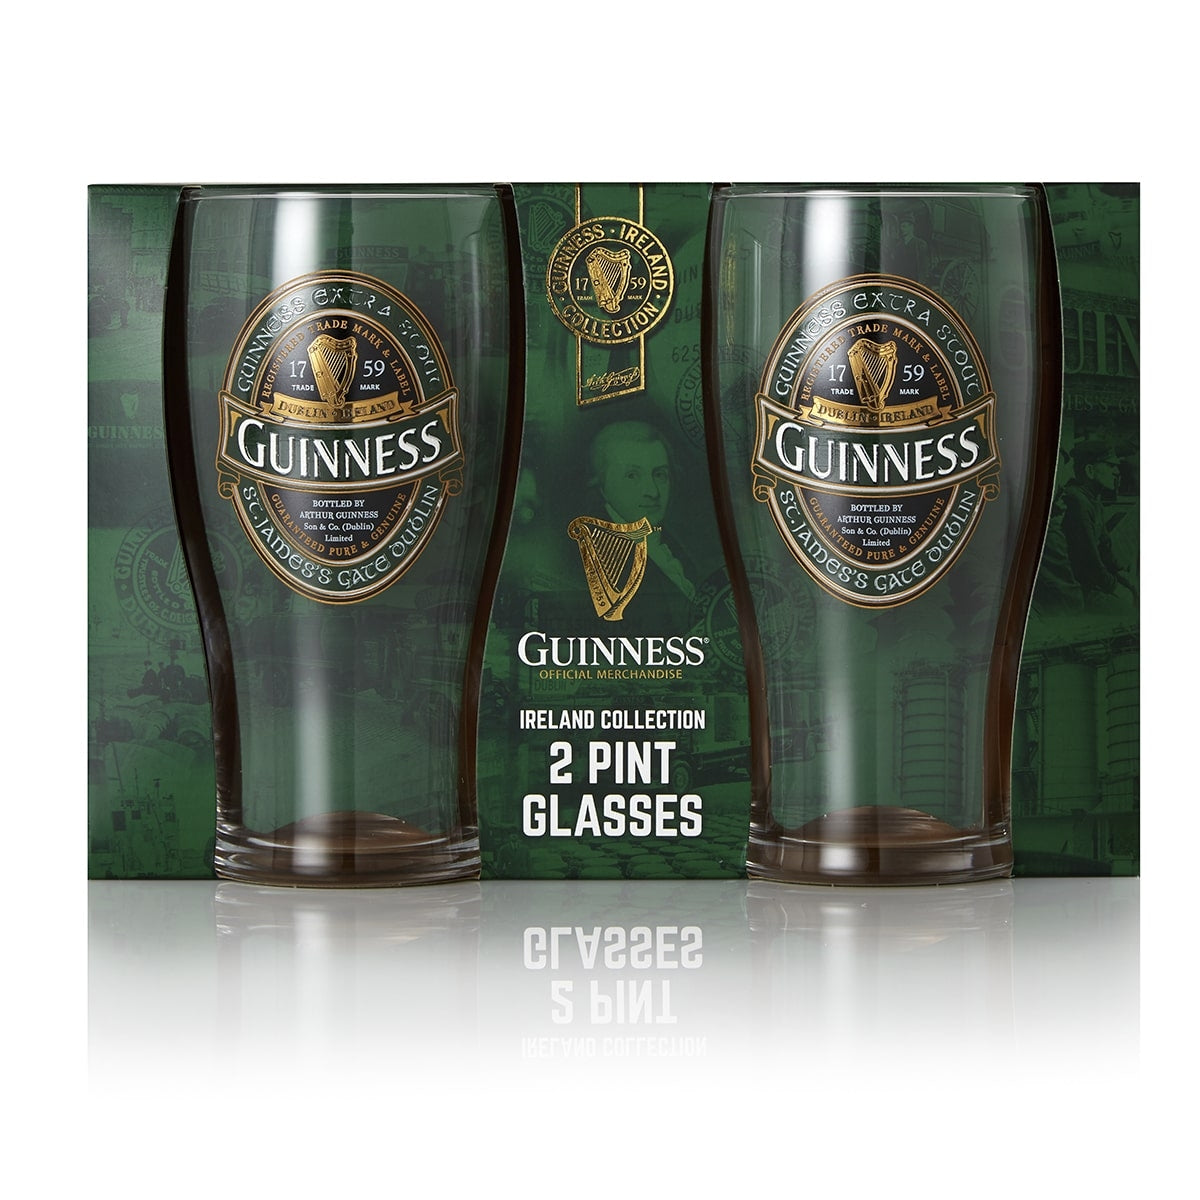 Two Guinness Ireland Collection Pint Glasses in a package, perfect for those who appreciate the taste of Ireland.